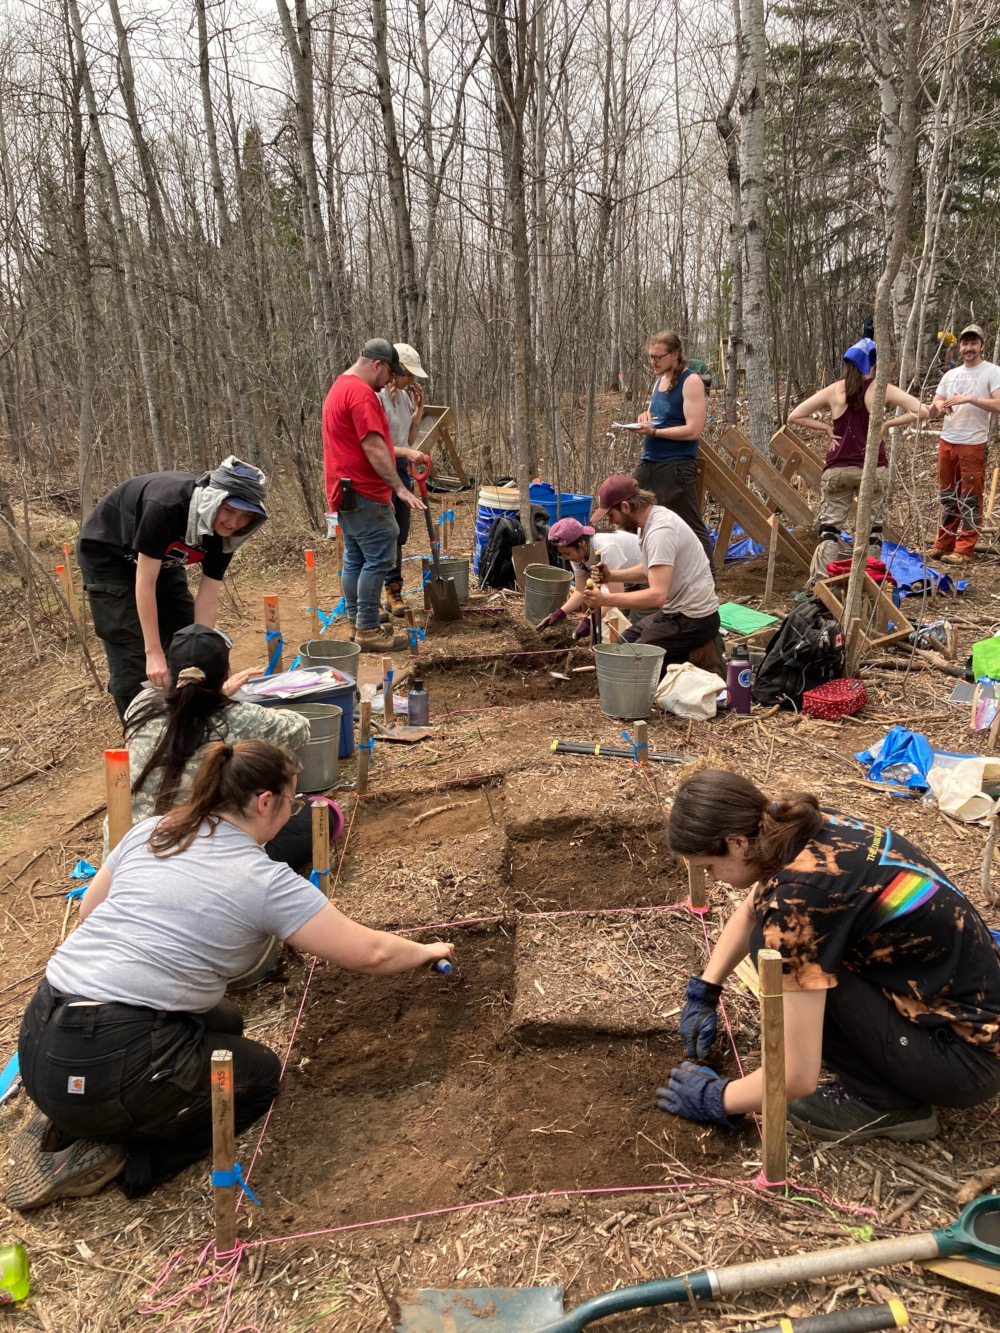 Photo of people working in an excavation site in the forest near Lakehead University